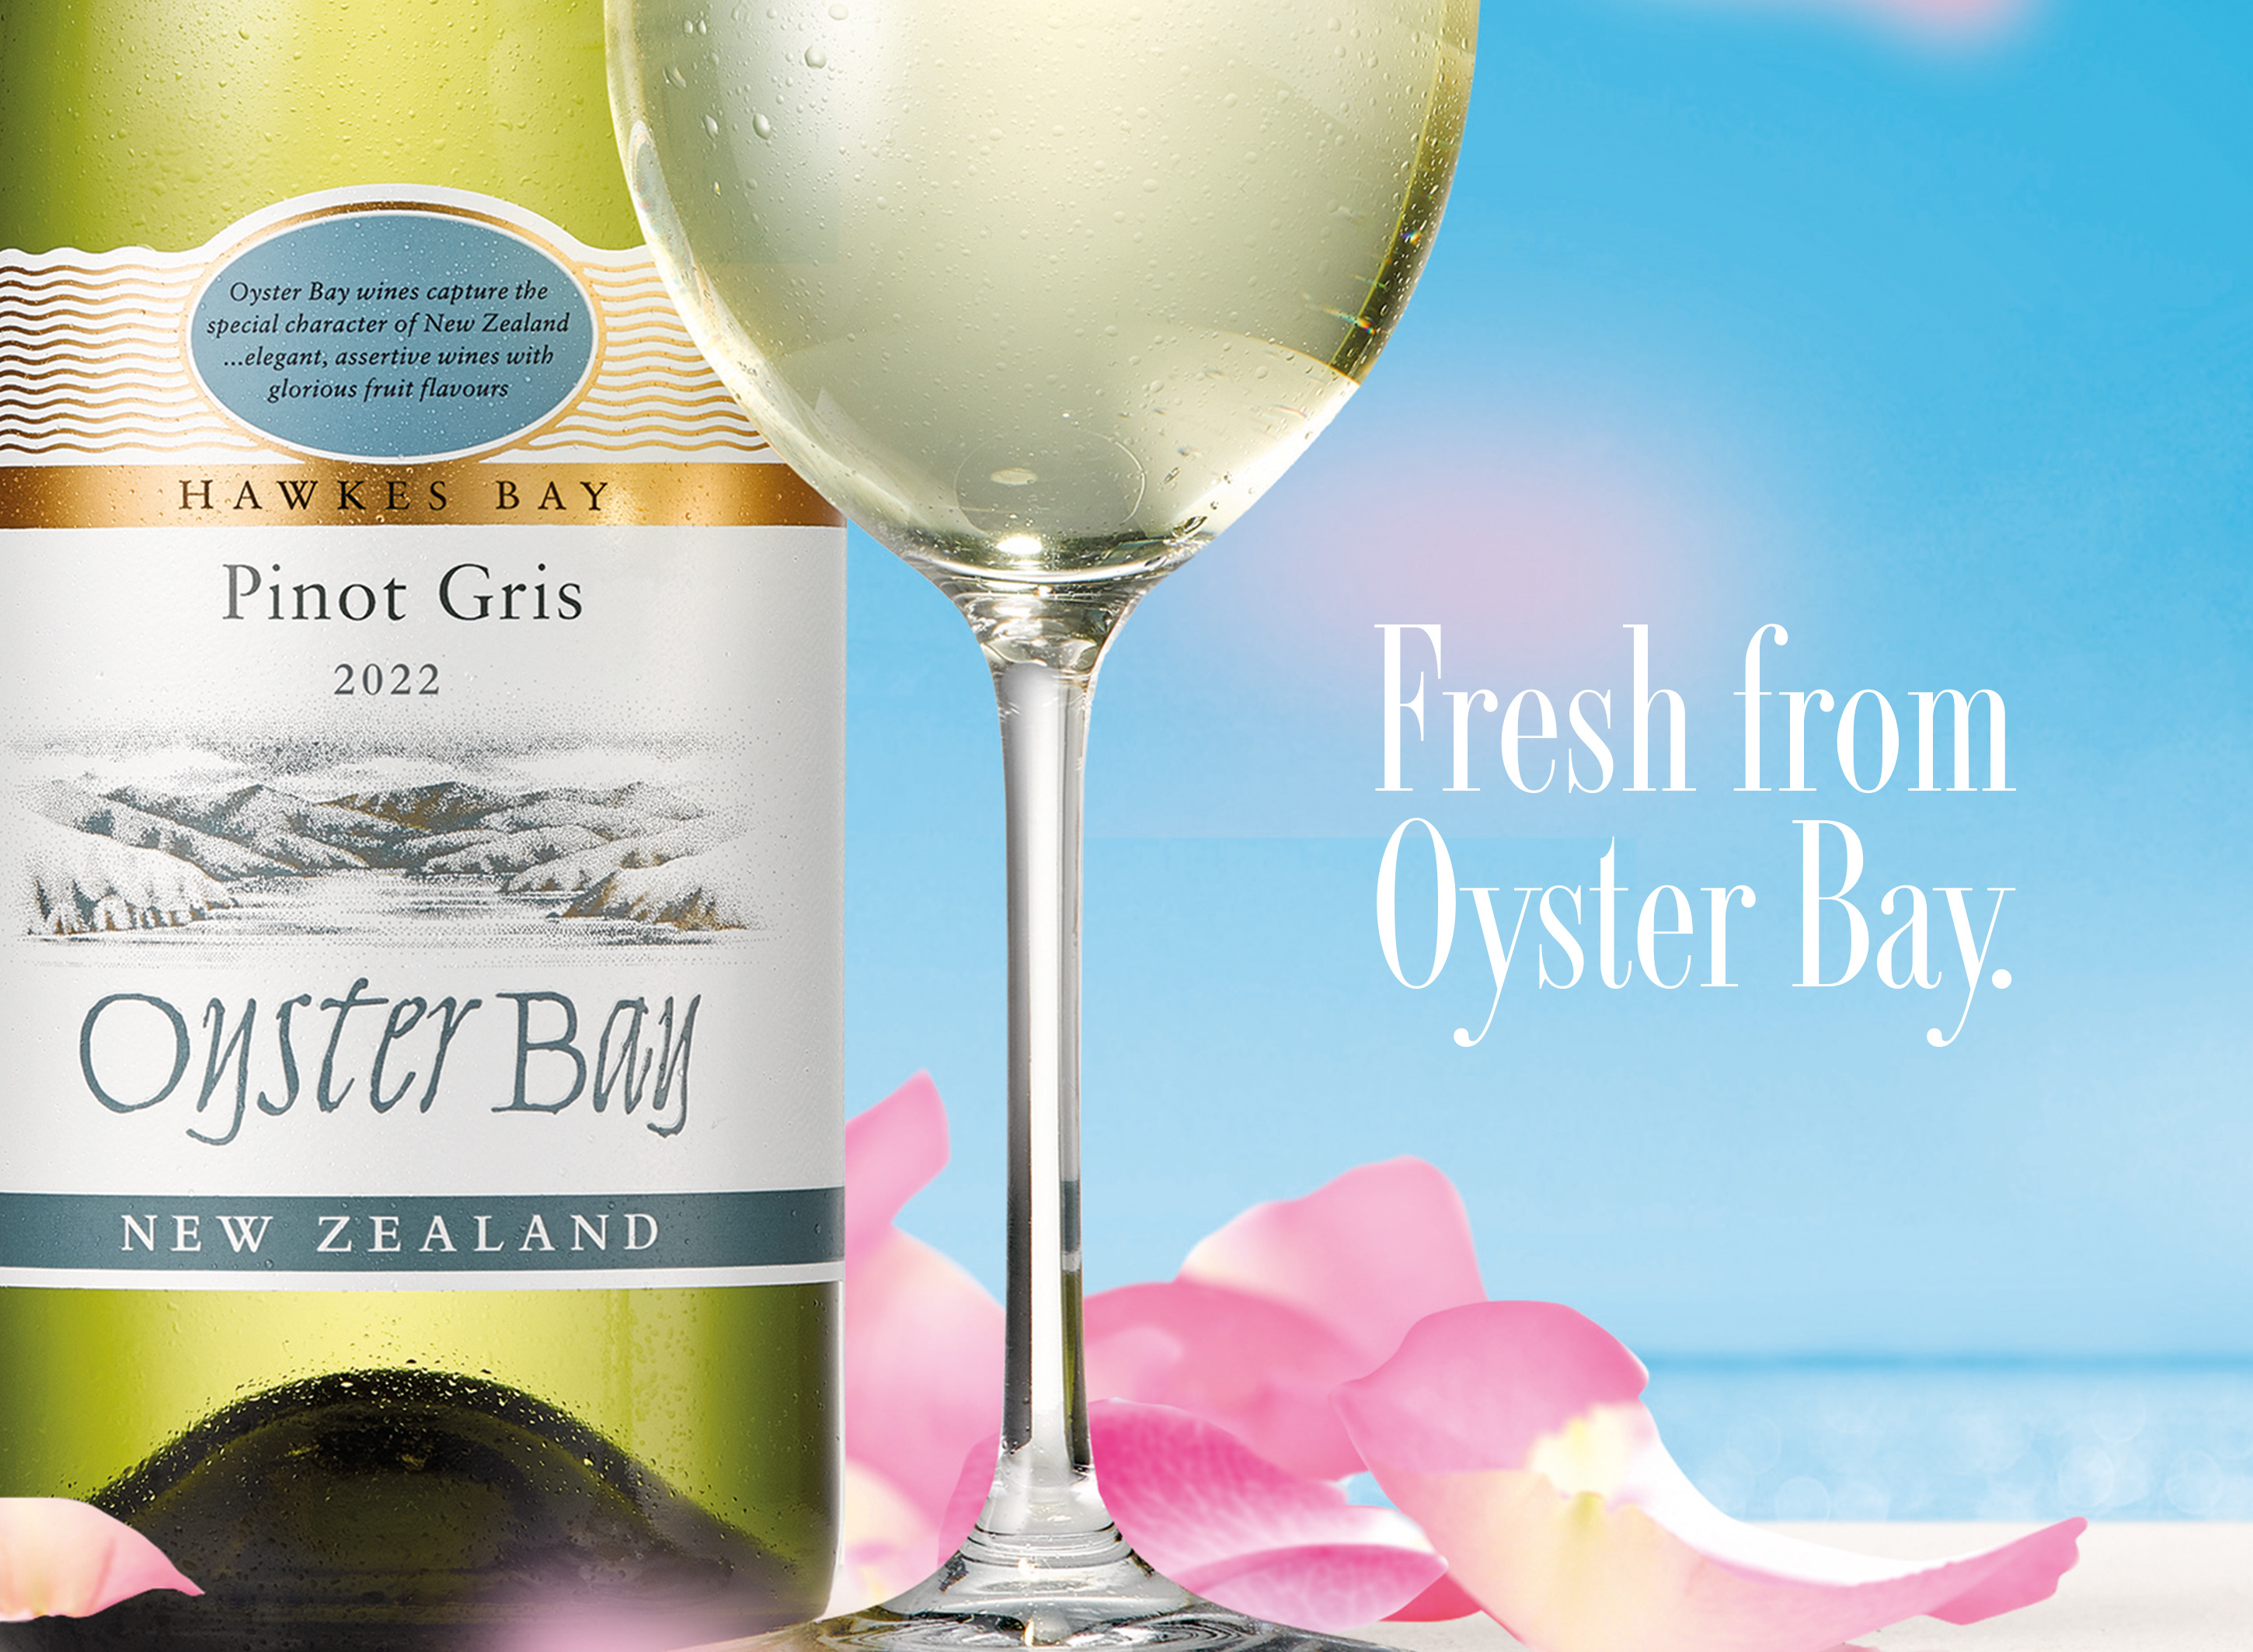 Oyster Bay Hawkes Bay New Zealand Pinot Gris Wine bottle and glass